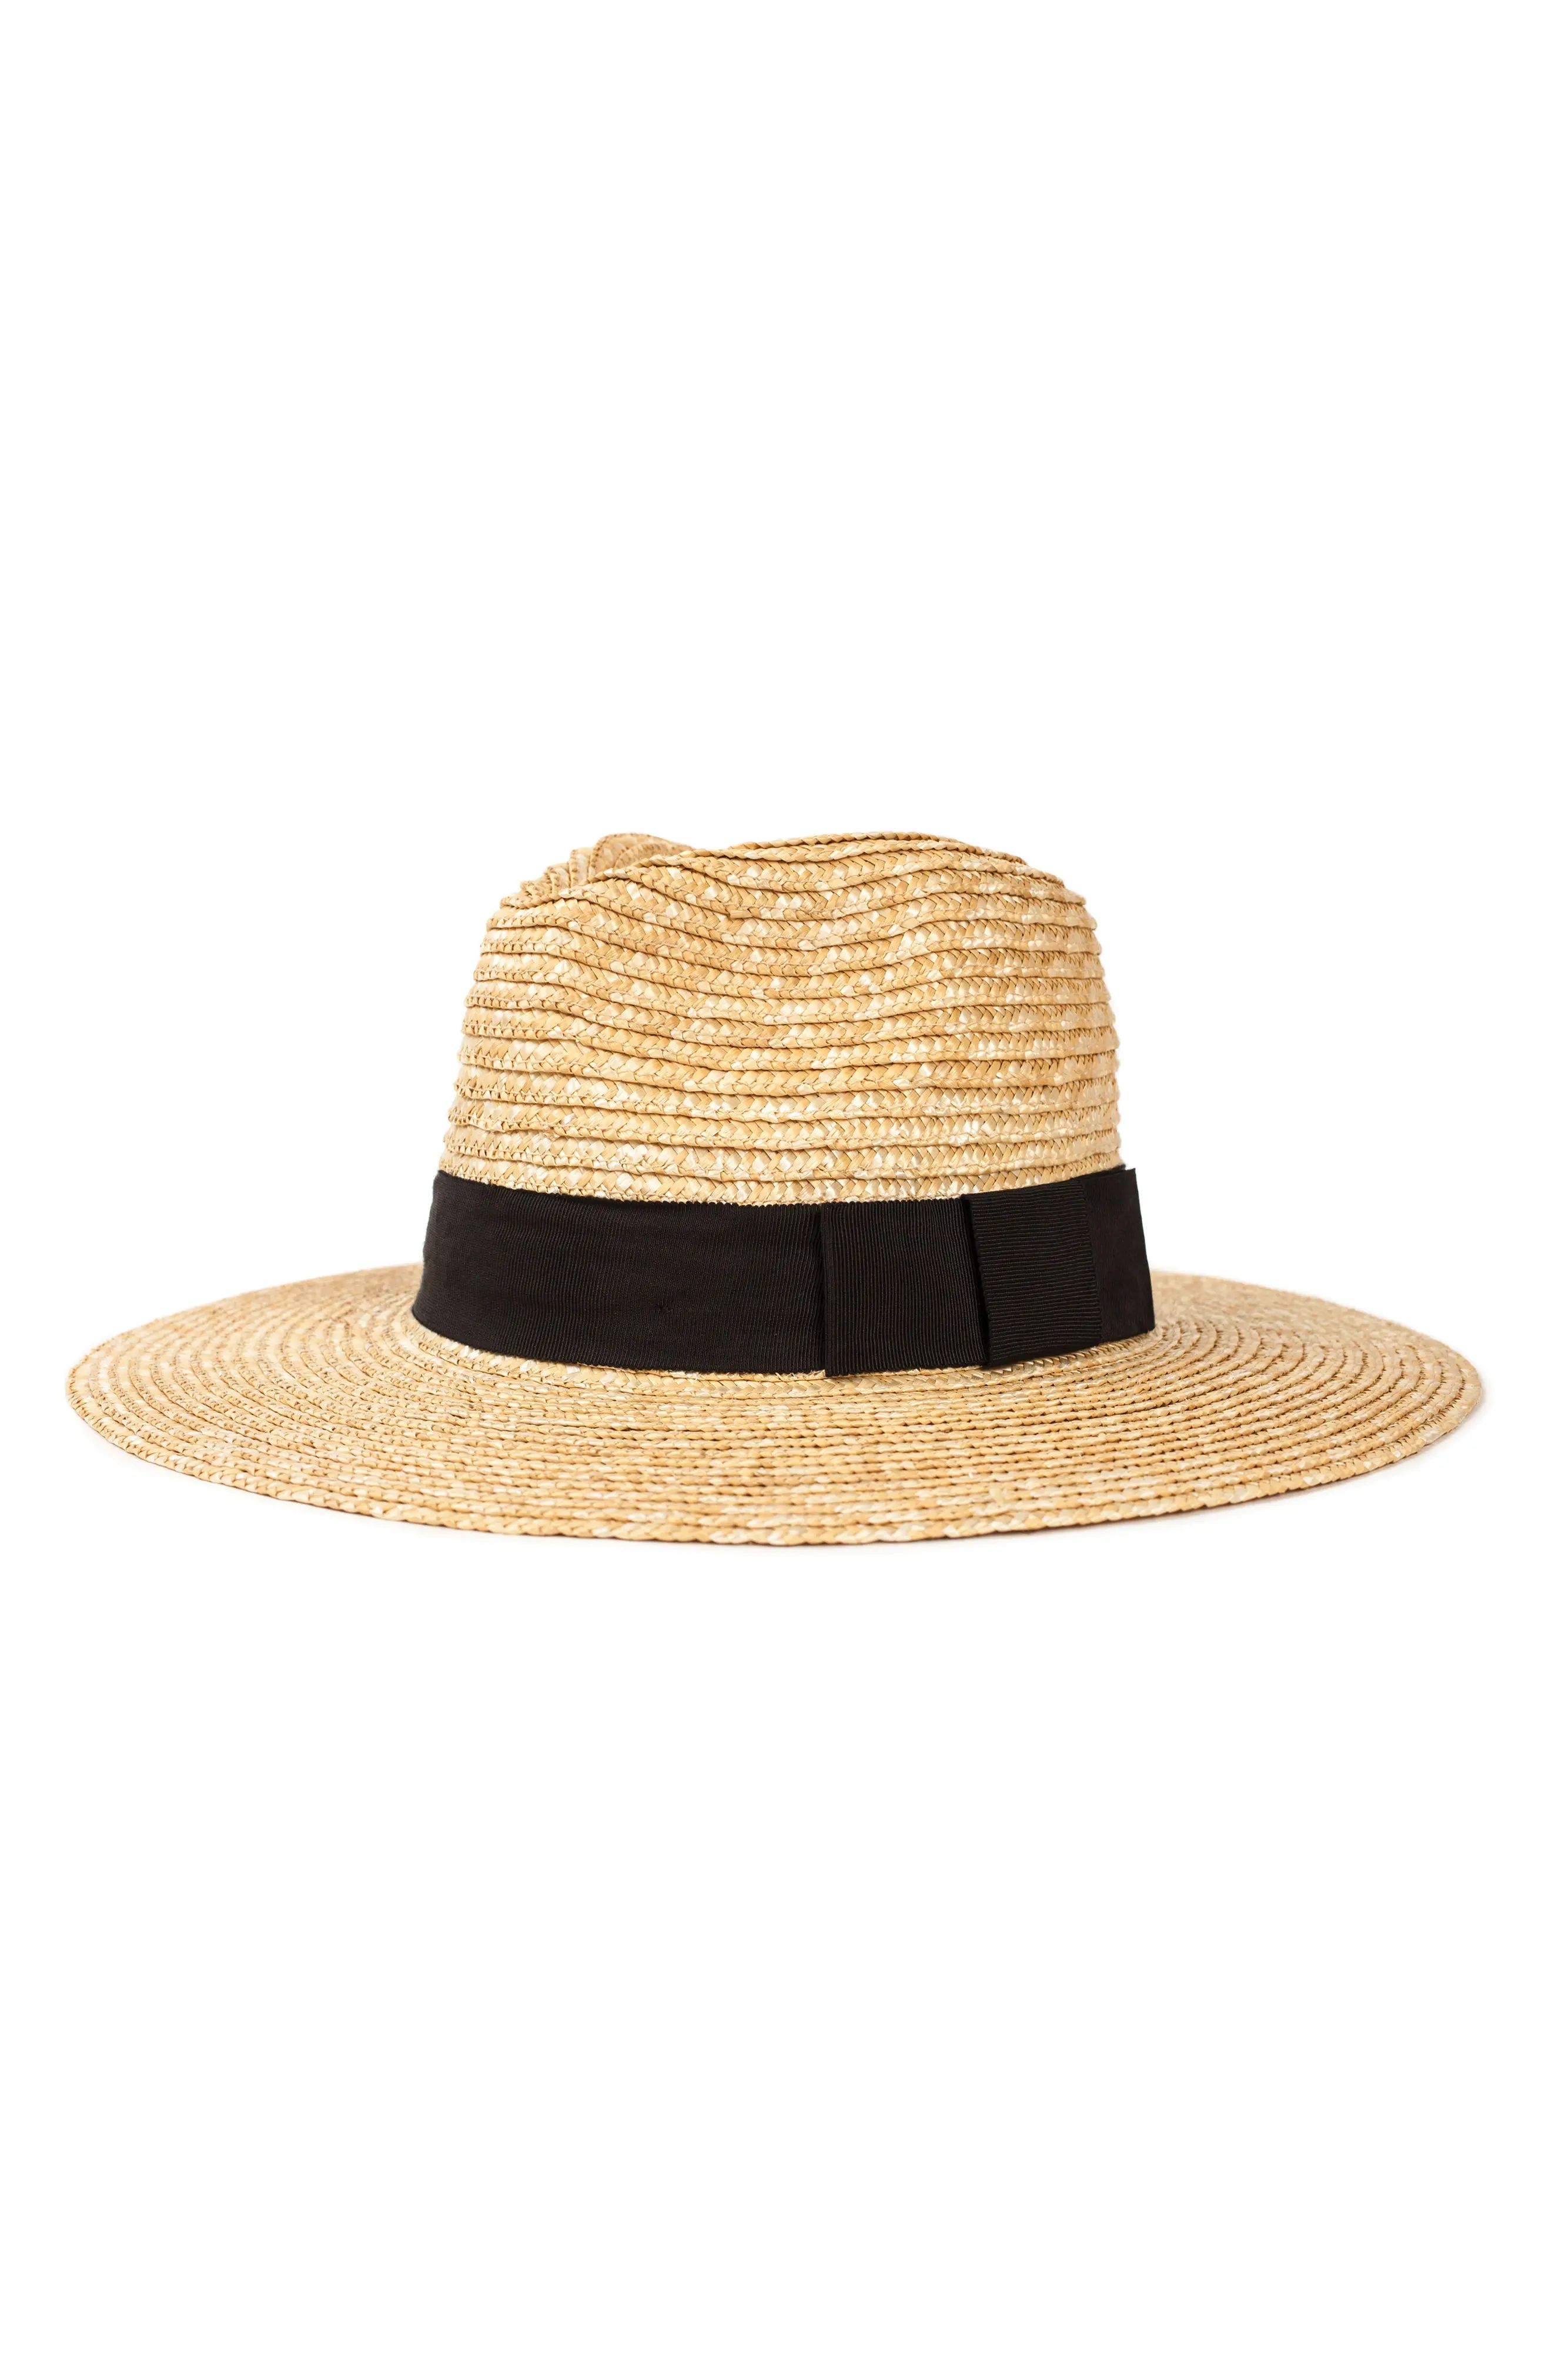 Brixton Joanna Straw Hat in Honey/black at Nordstrom, Size X-Small | Nordstrom